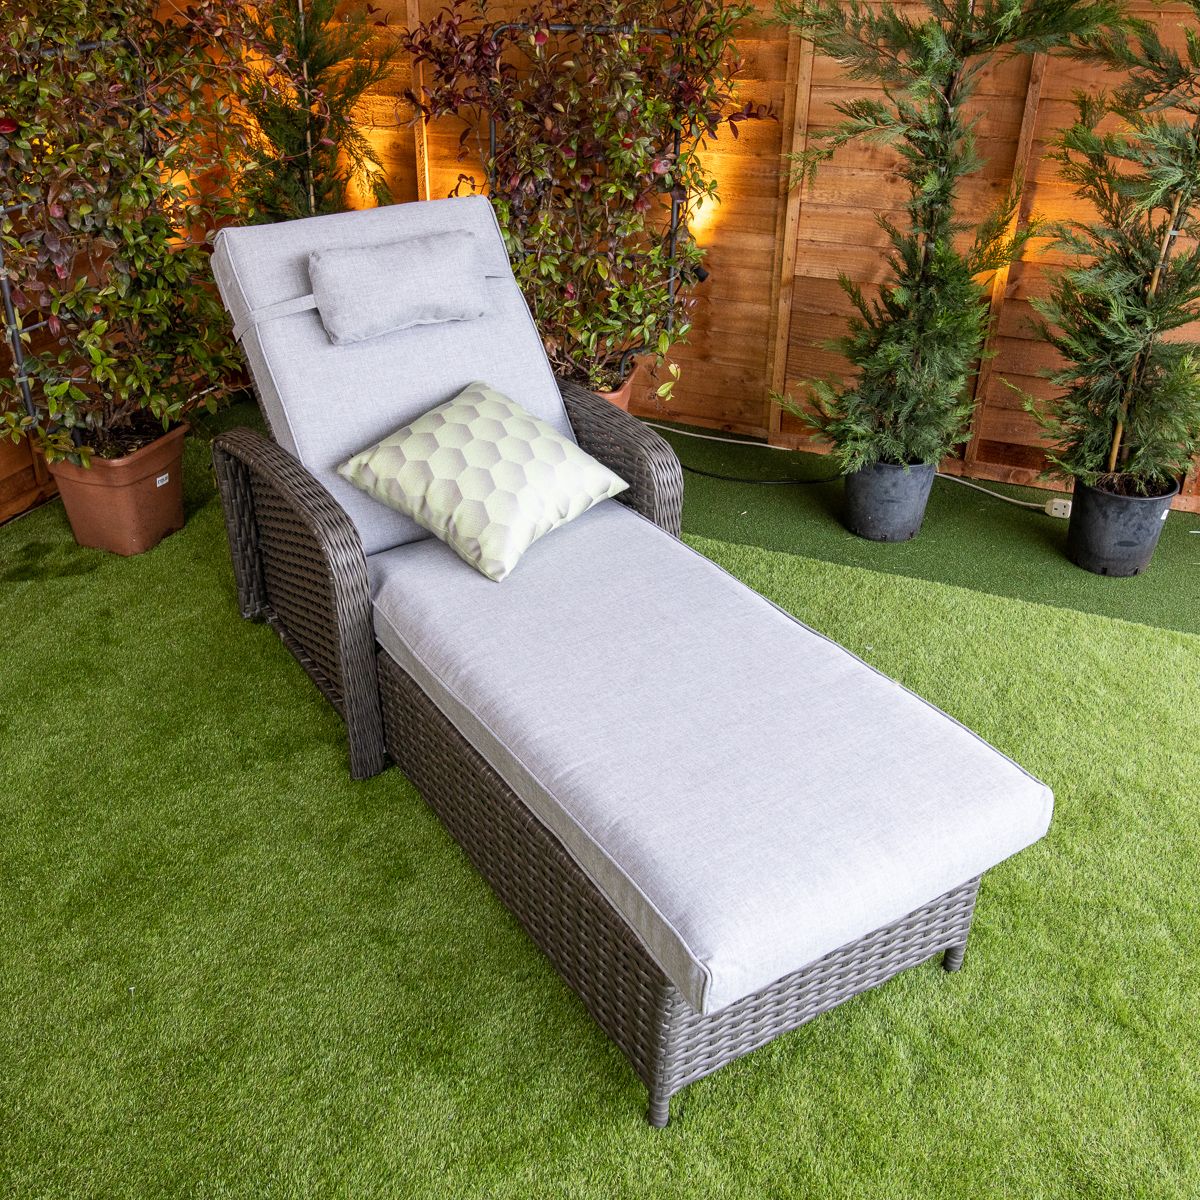 Platinum Venice Wheeled Lounger With Arms